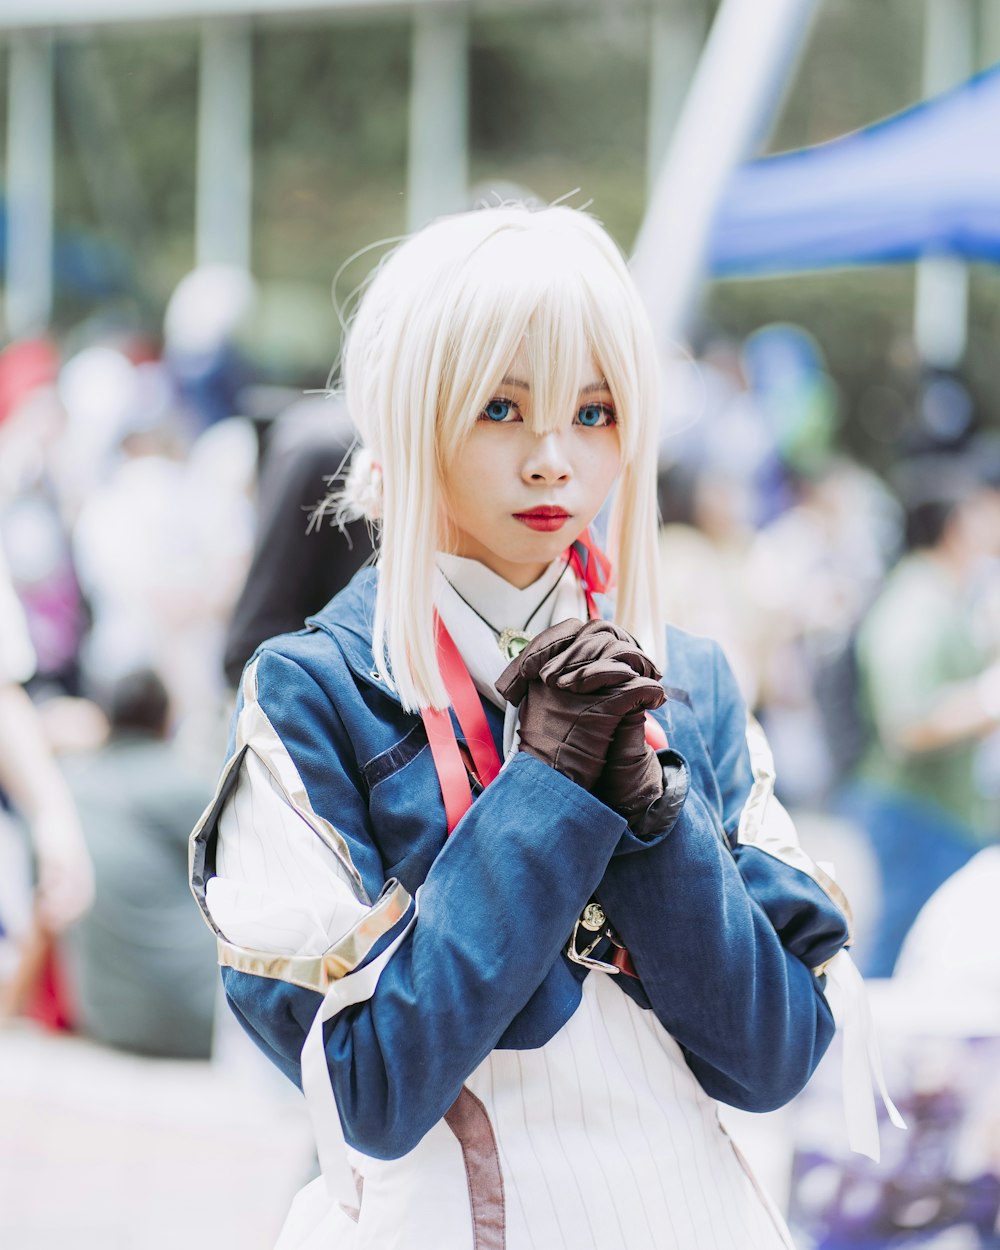 Anime Cosplay Pictures | Download Free Images on Unsplash